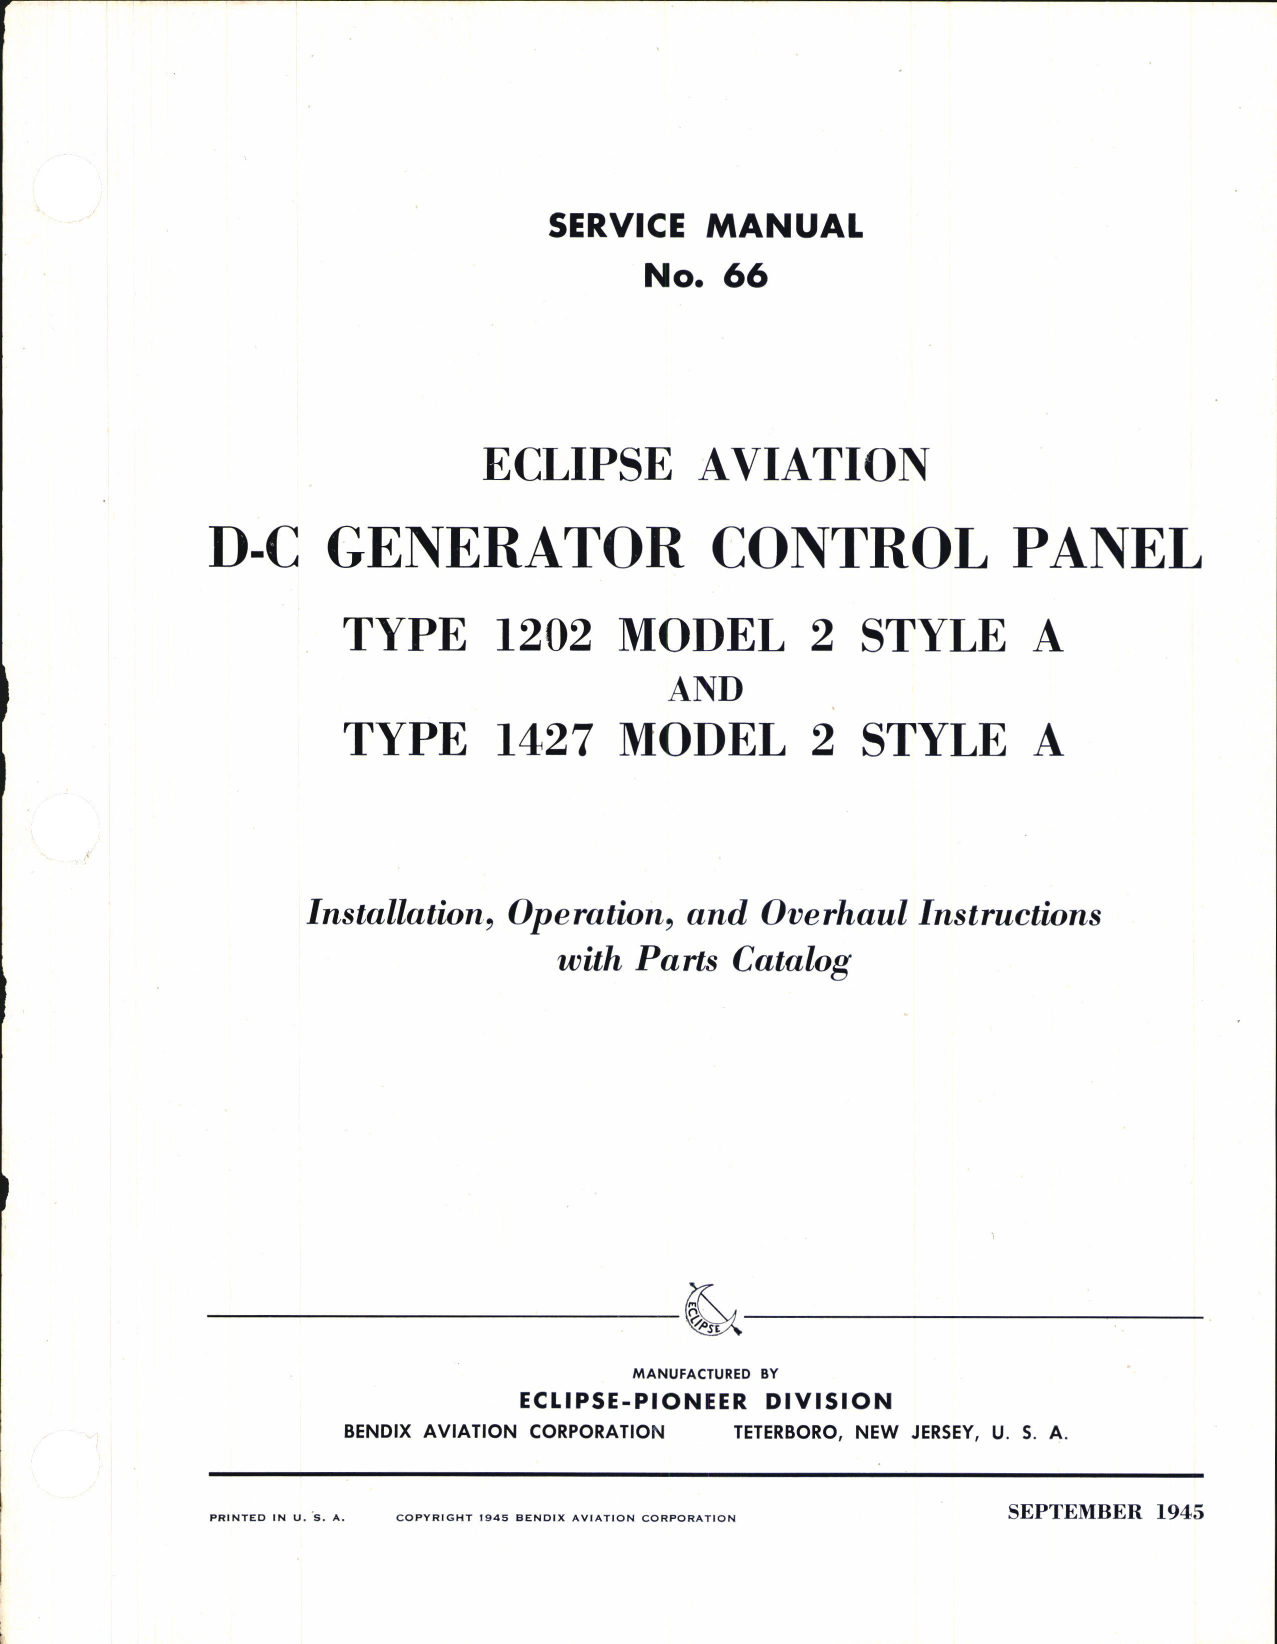 Sample page 1 from AirCorps Library document: Service Manual for D-C Generator Control Panel Type 1202 and 1427, Model 2, Style A